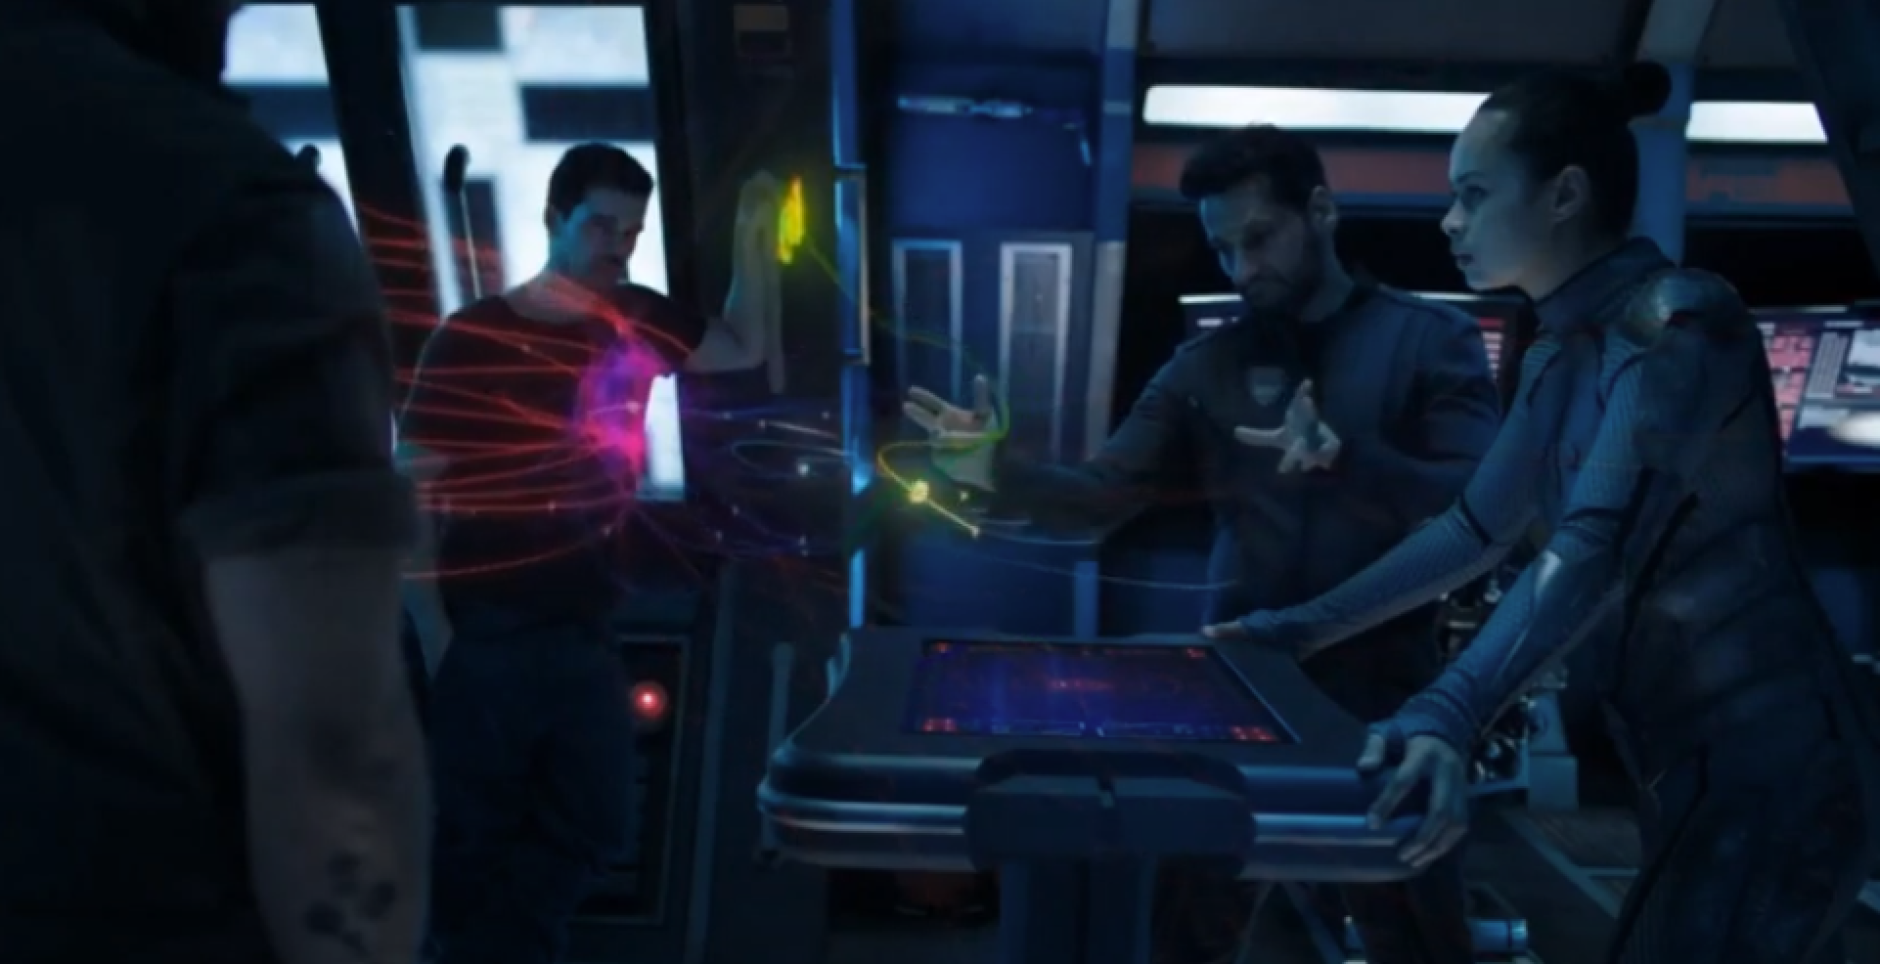 Four crew members aboard the Rocinante interacting with a holographic user interface on the center console of the ship.